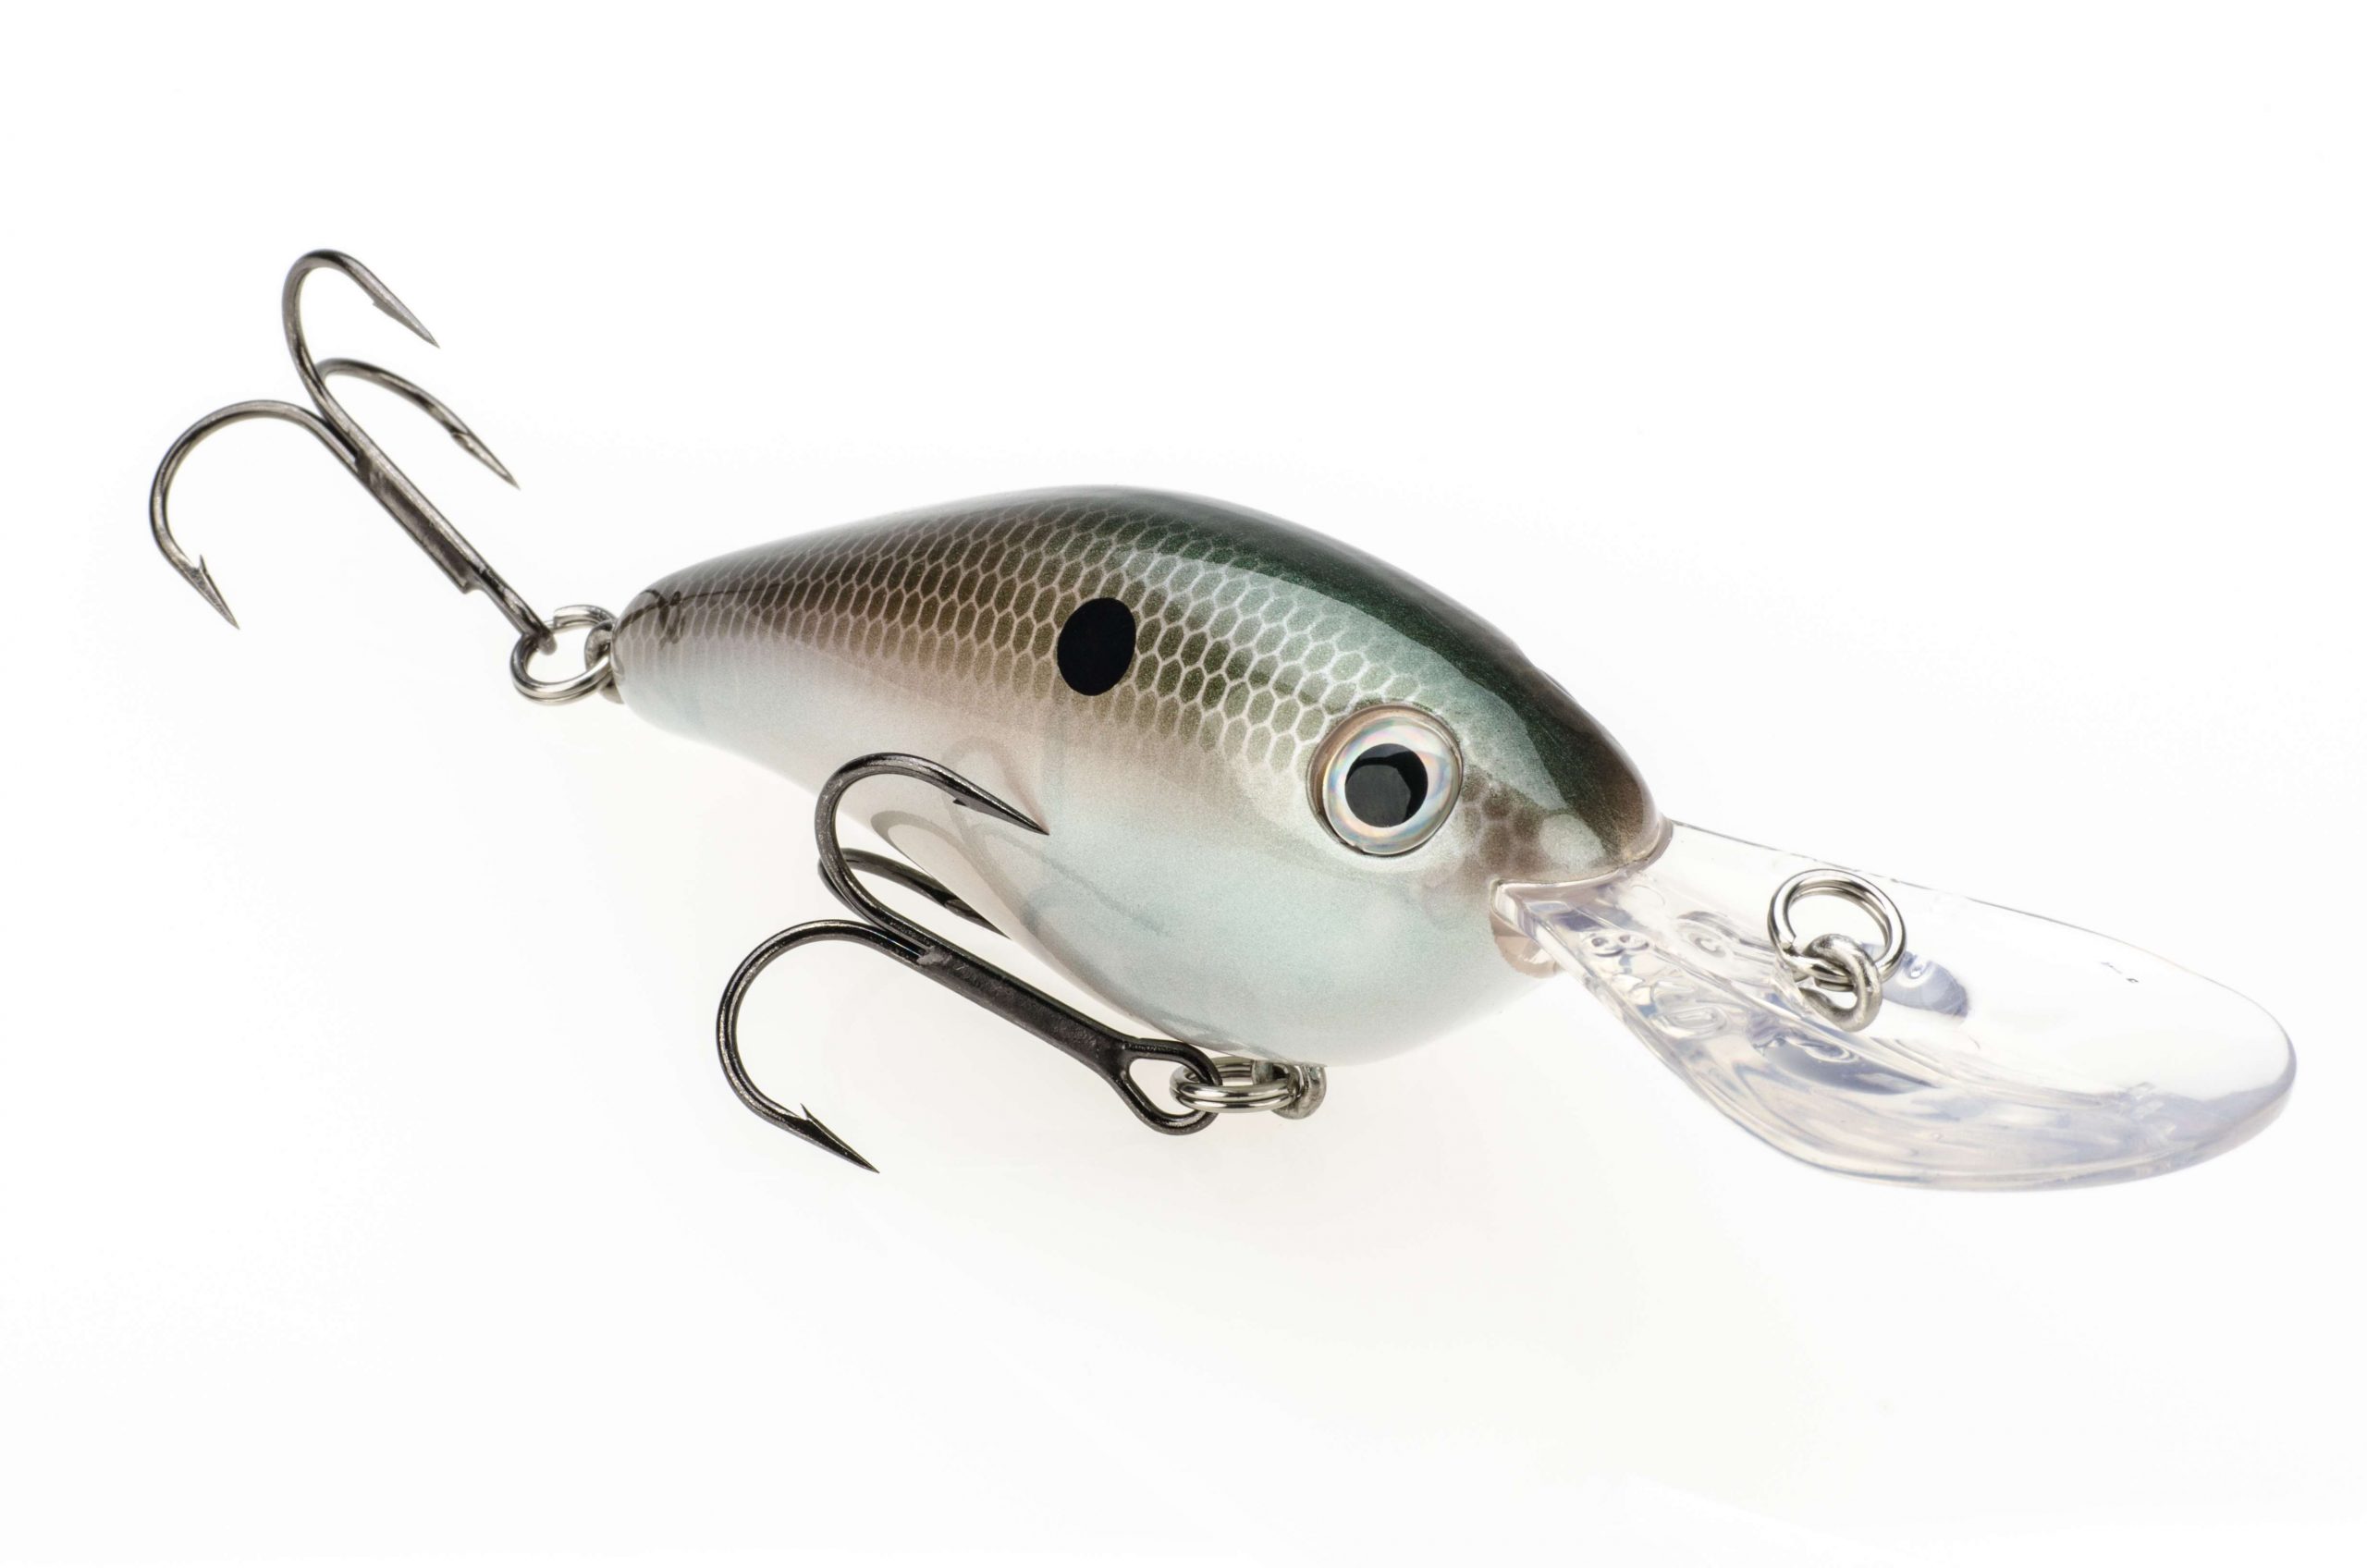 <b>Strike King</b><br>	8XD<br>	 Dives to 20-plus feet. An extra-large deep-diving crankbait with a unique curved bill that allows the bait to dive deeper and faster than most other deep-diving crankbaits. The 8XD has a different action than the 6XD and 10XD.